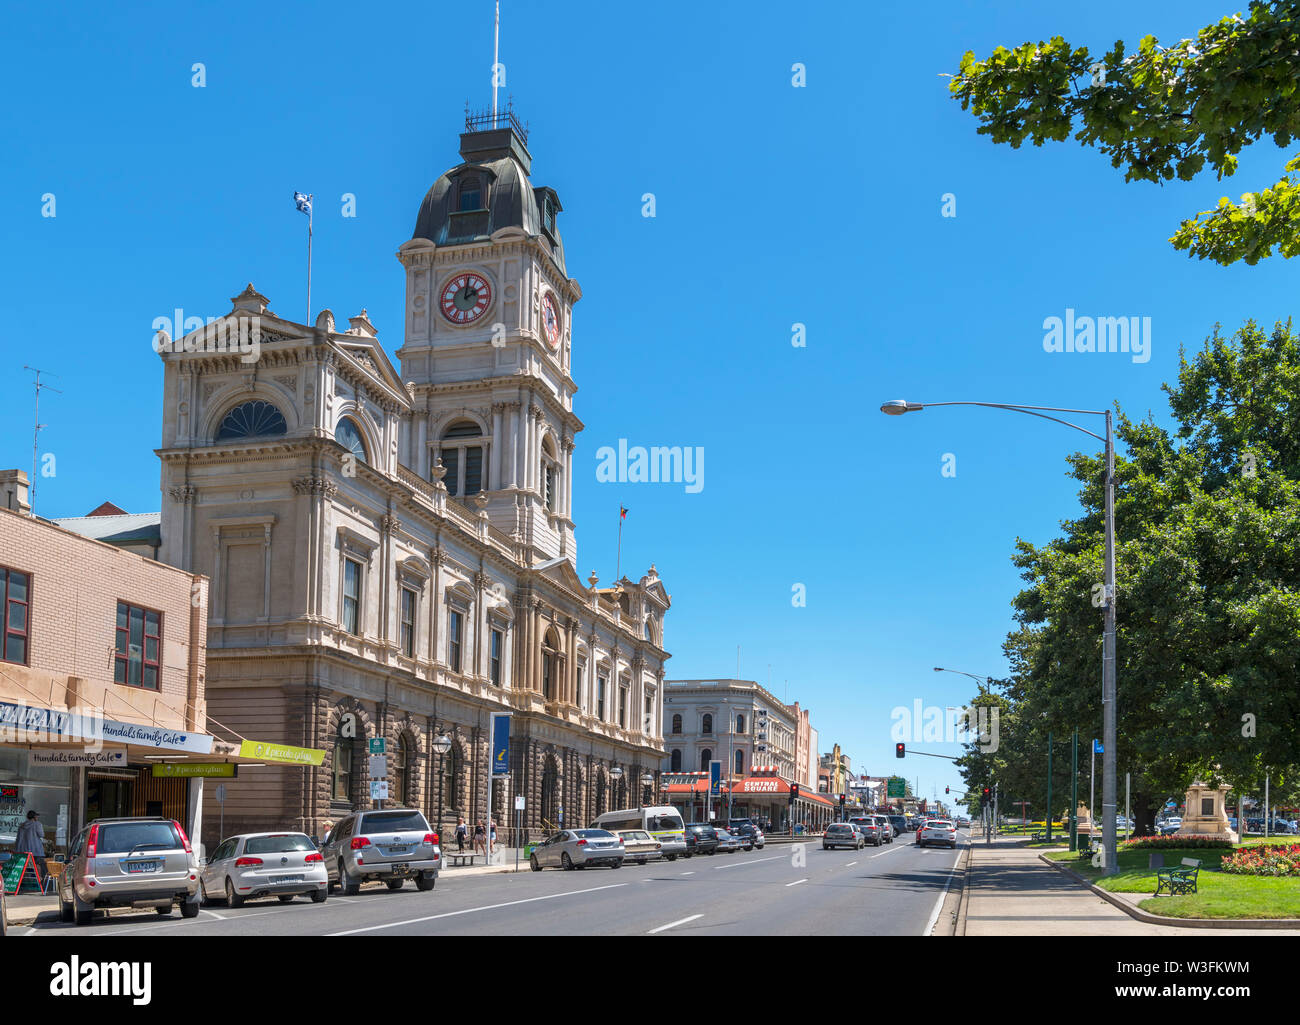 Town Hall and other historic buildings on Sturt Street, the main street in the old gold mining town of Ballarat, Victoria, Australia Stock Photo